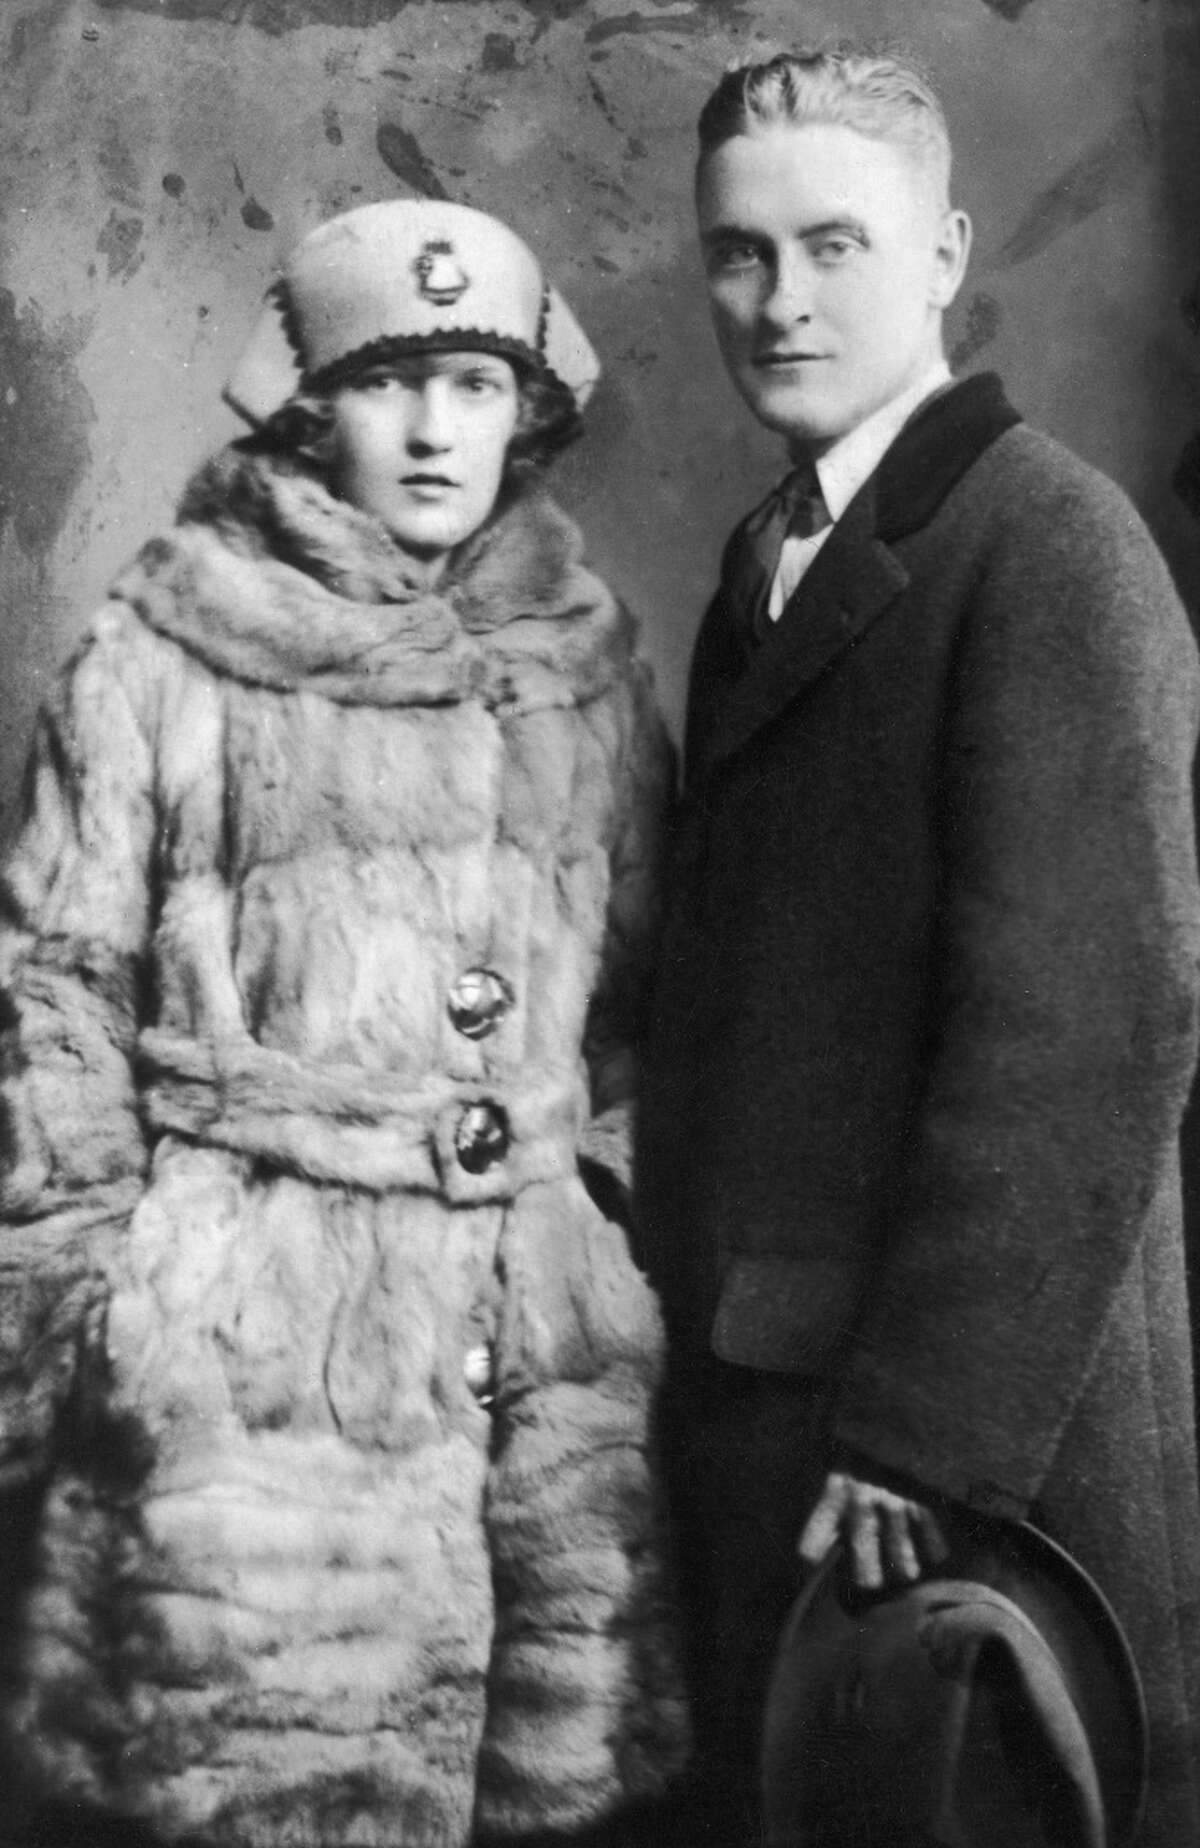 American author F. Scott Fitzgerald and his wife Zelda in 1921.